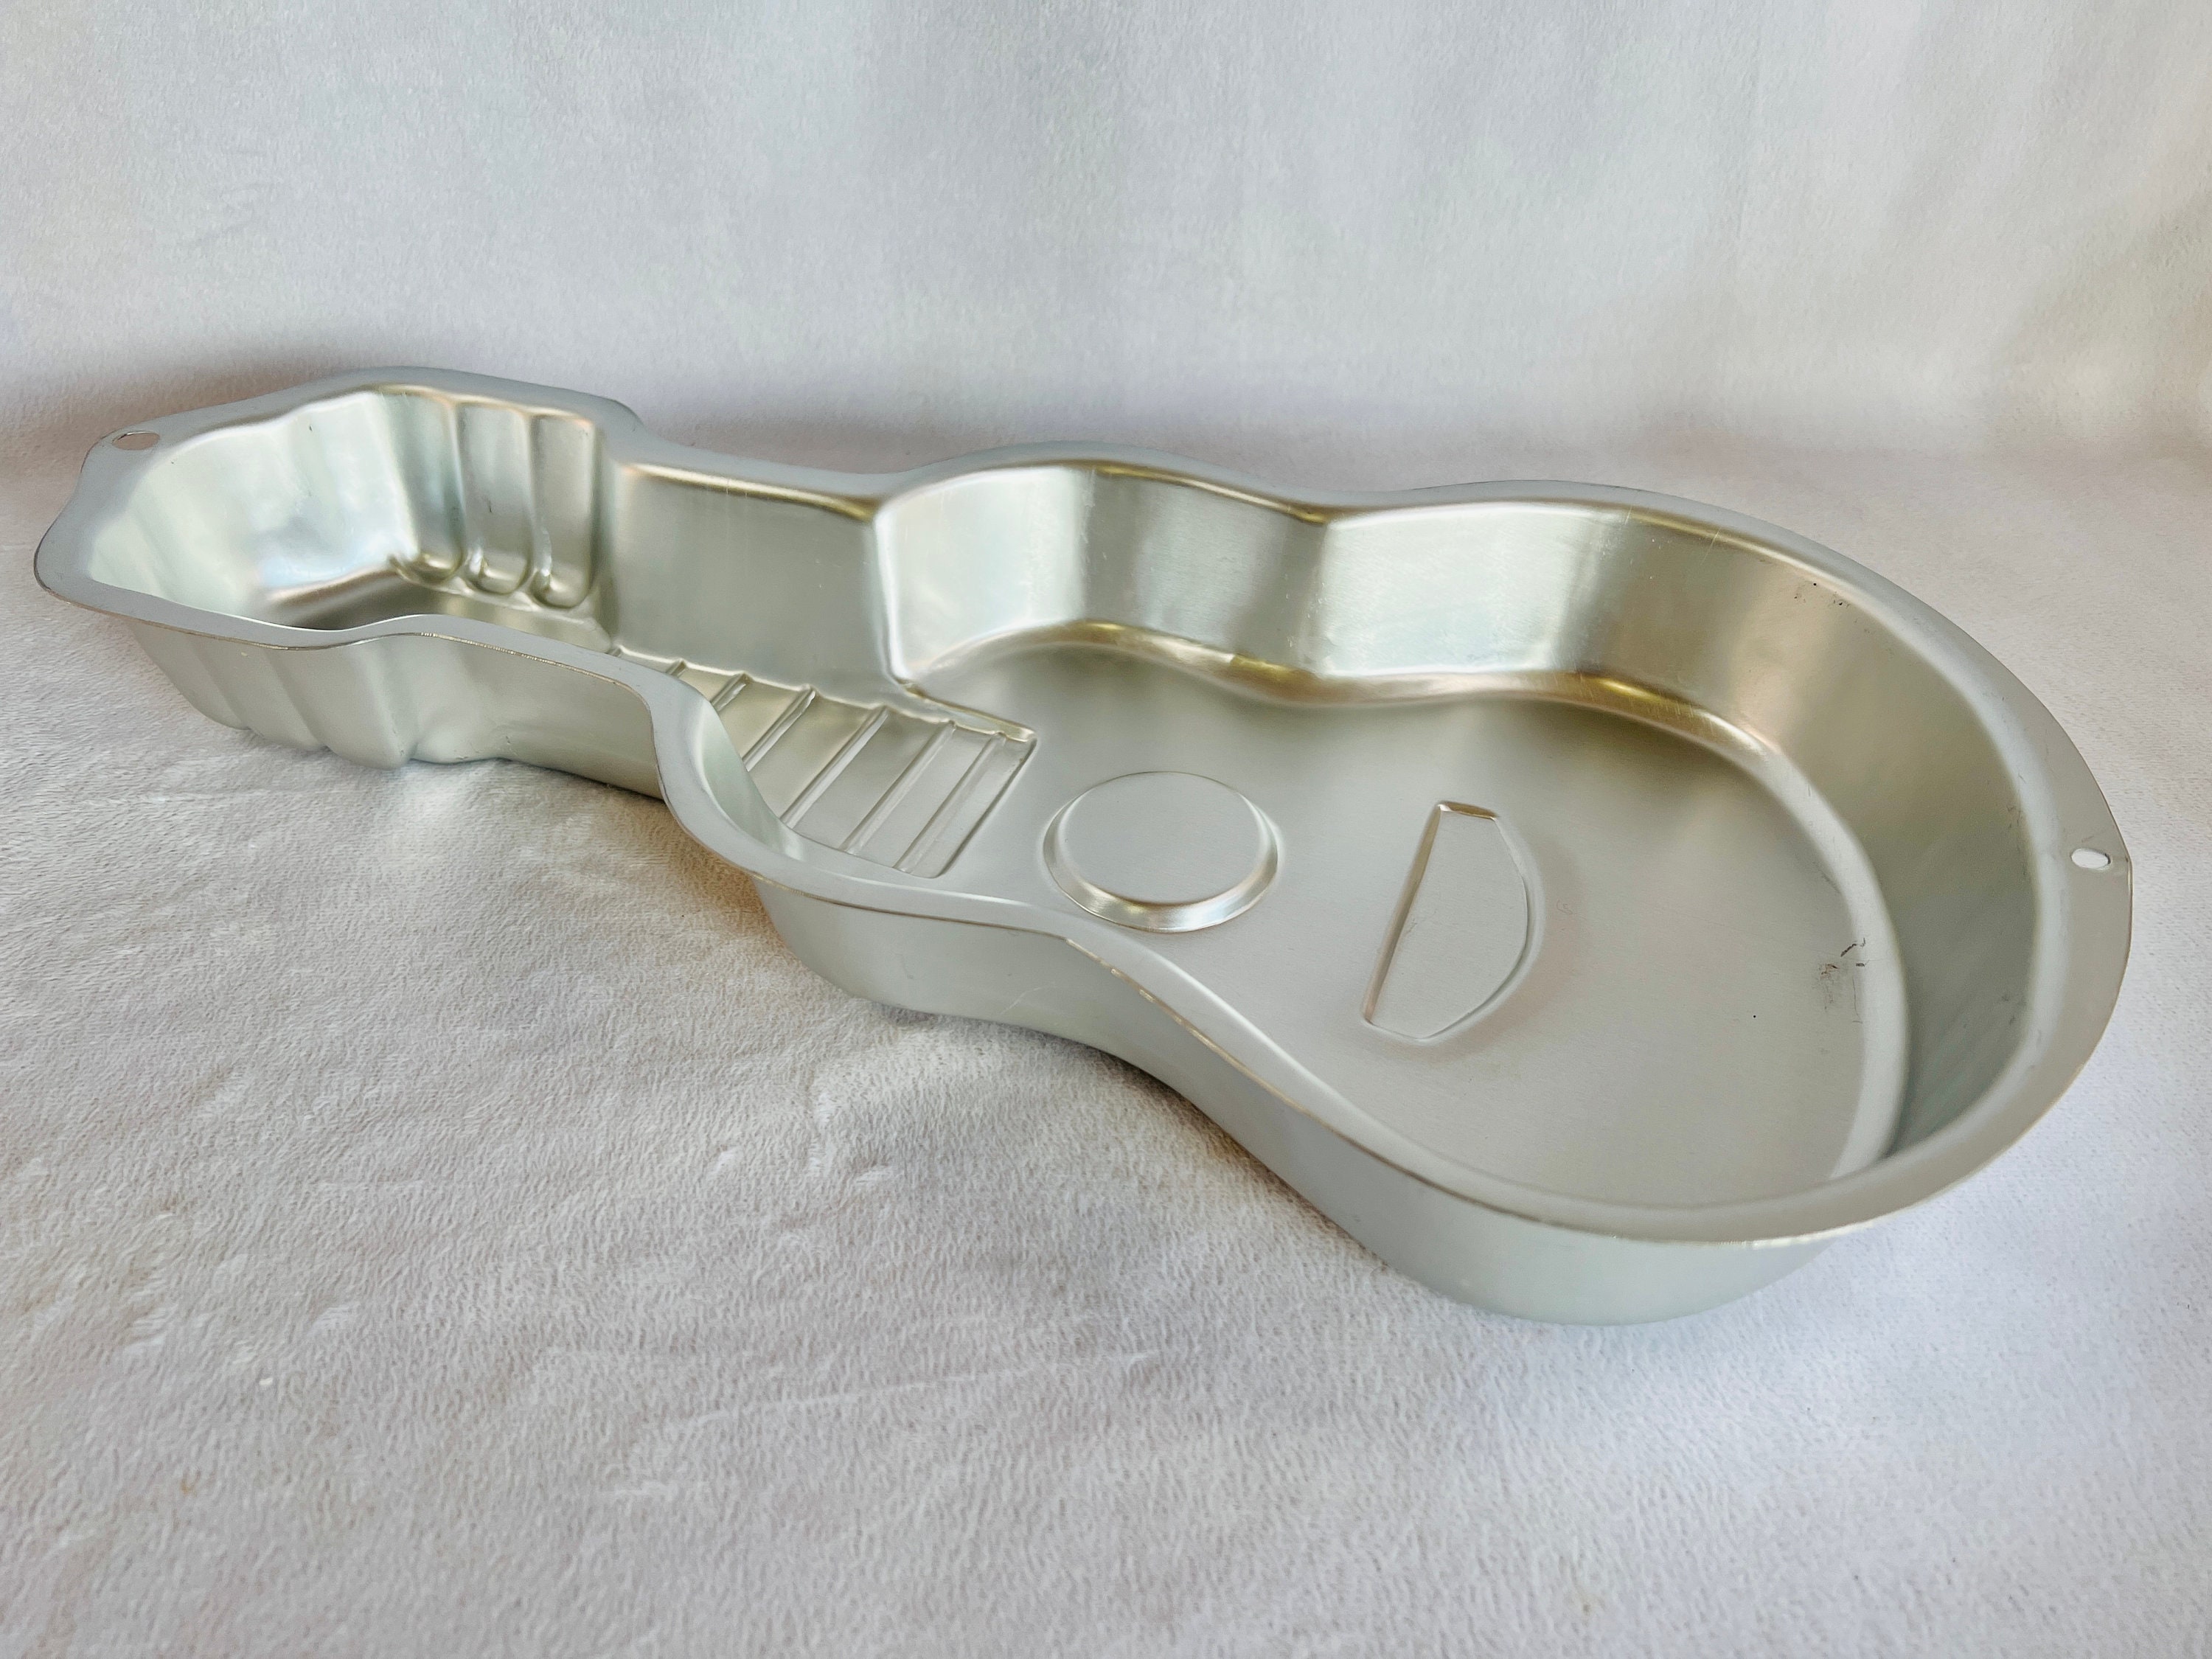 Wilton Guitar Shaped Cake Pan/dessert Mold Perfect for the 